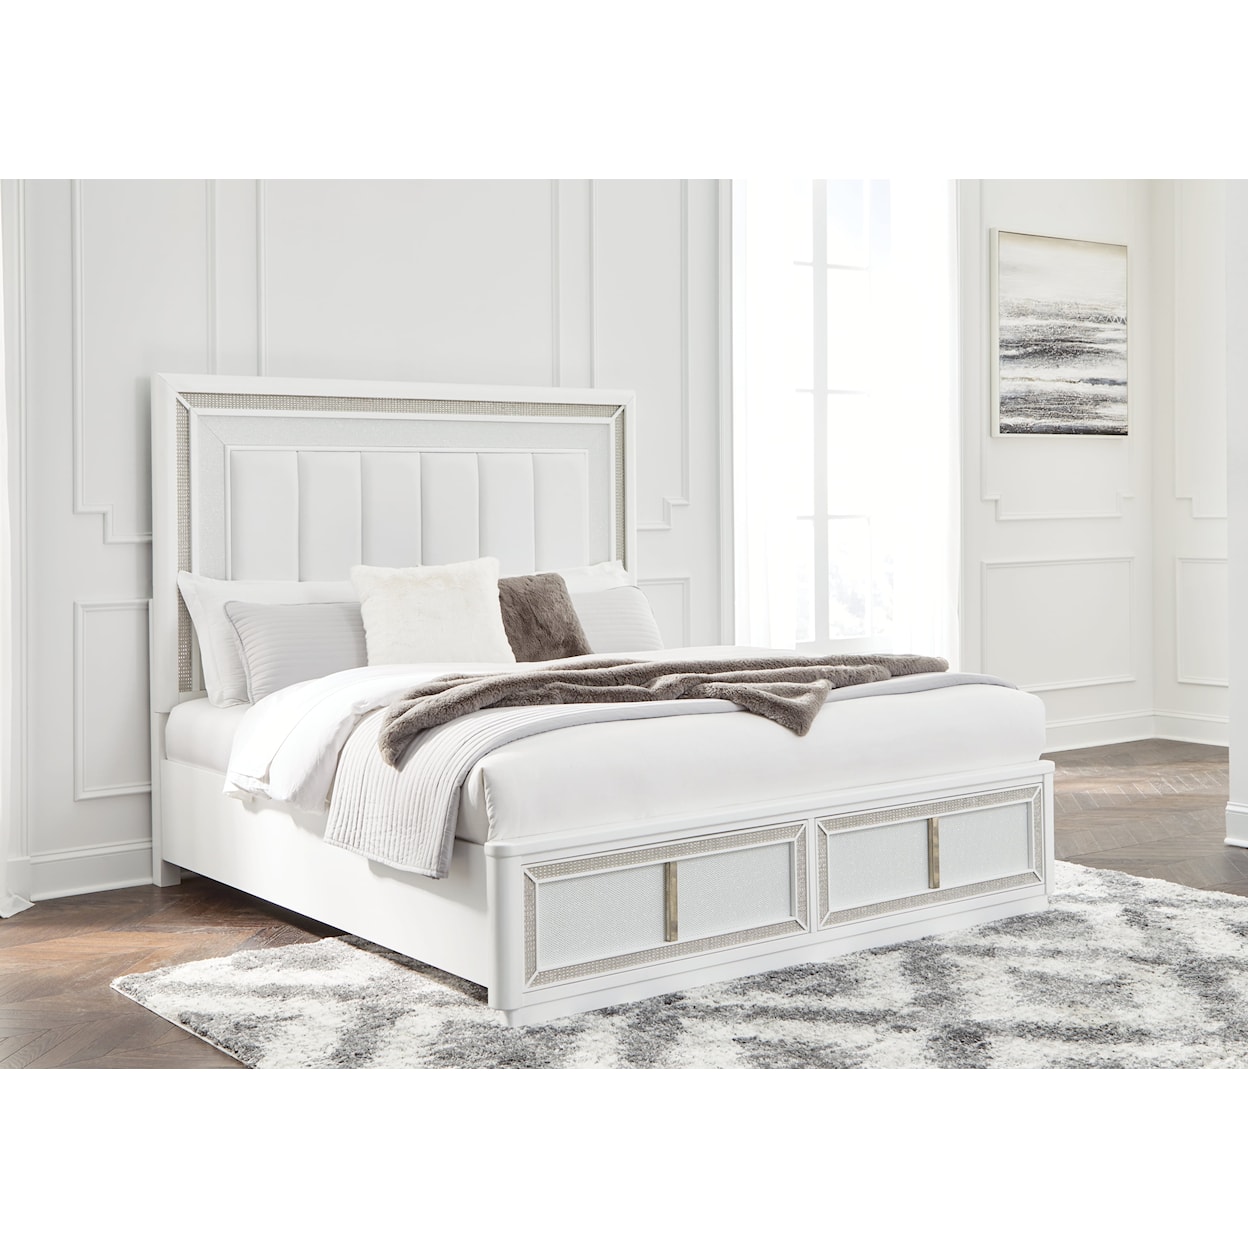 Signature Design by Ashley Chalanna Queen Bedroom Group